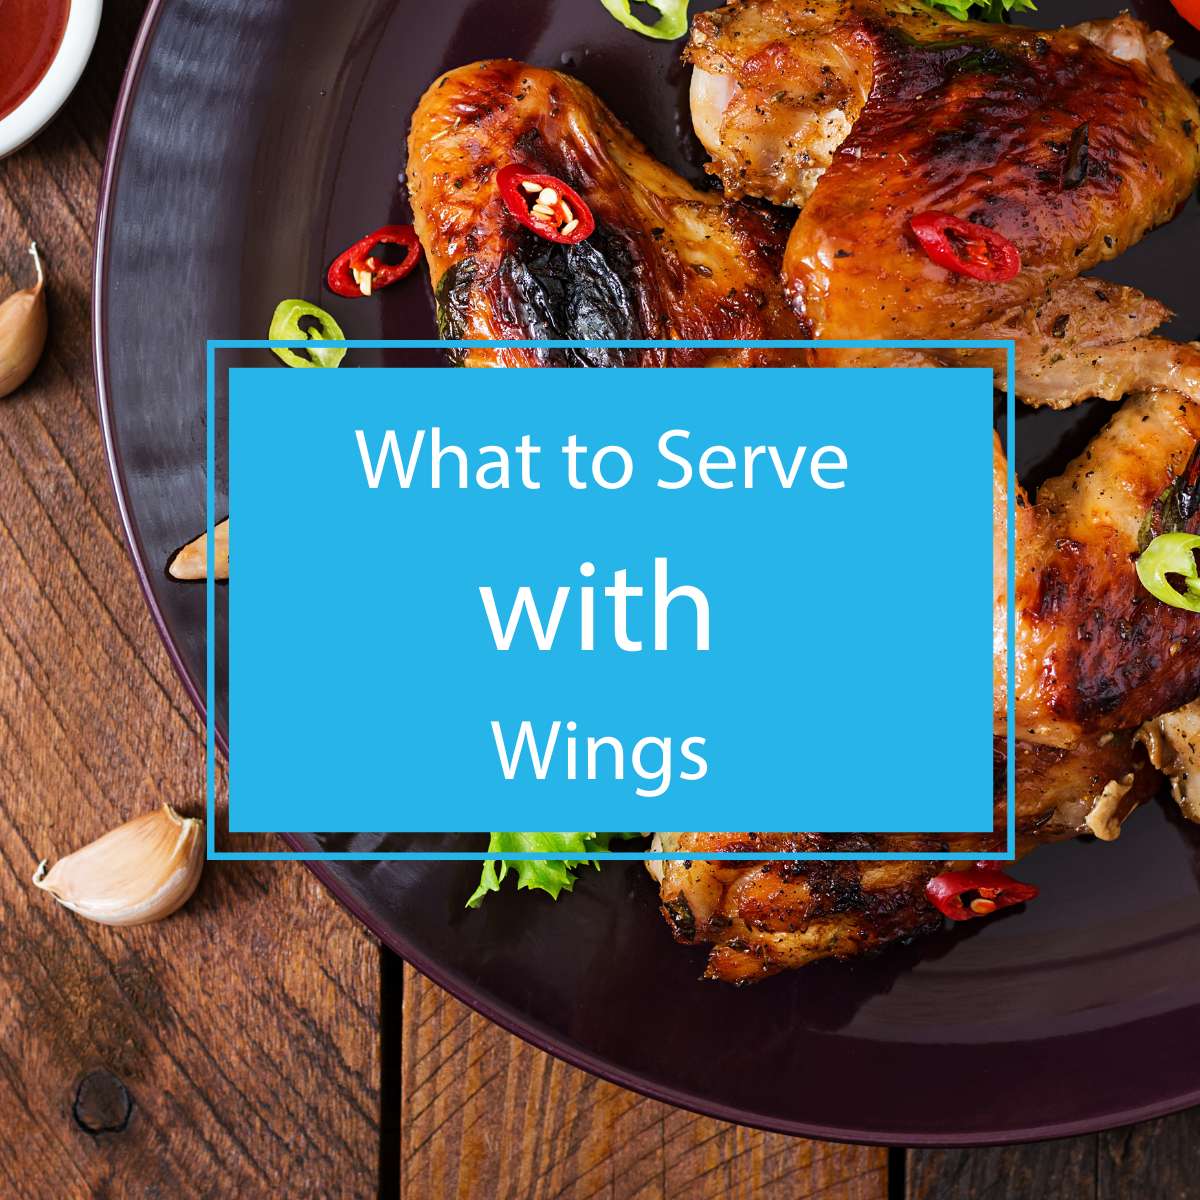 What to Serve with Wings